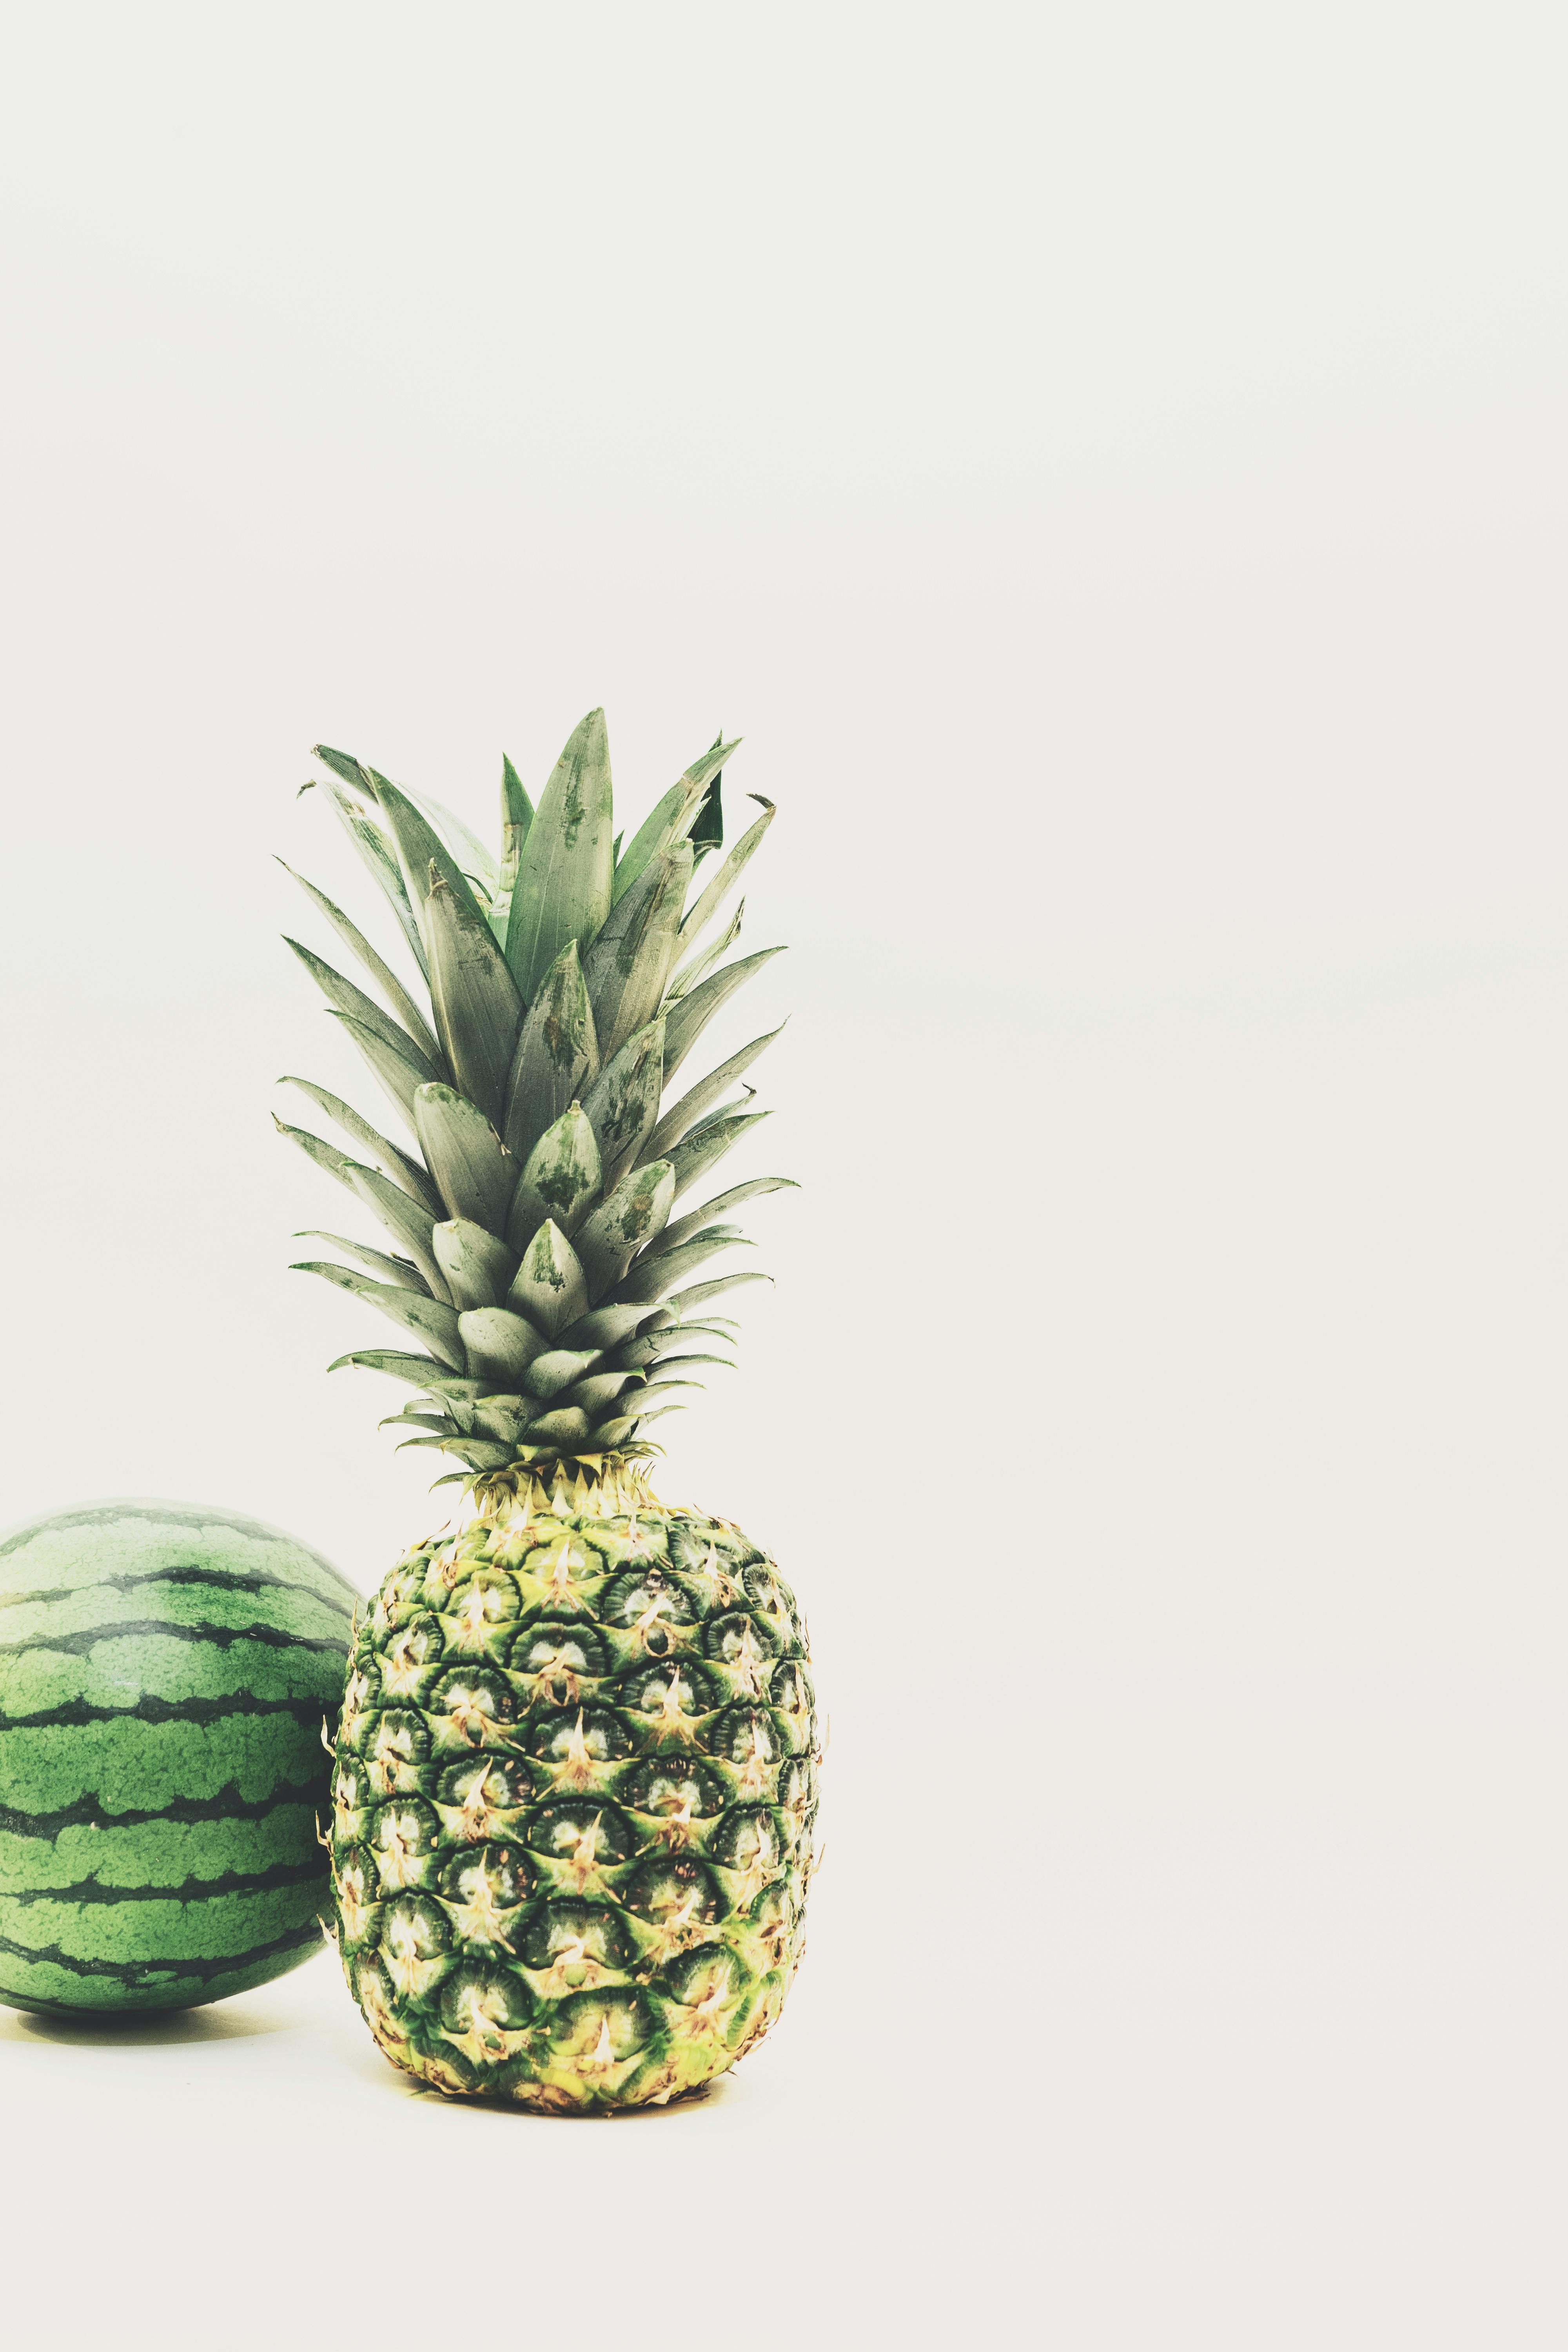 Photo of Green Pineapple and Watermelon Fruits Against White Background ·  Free Stock Photo